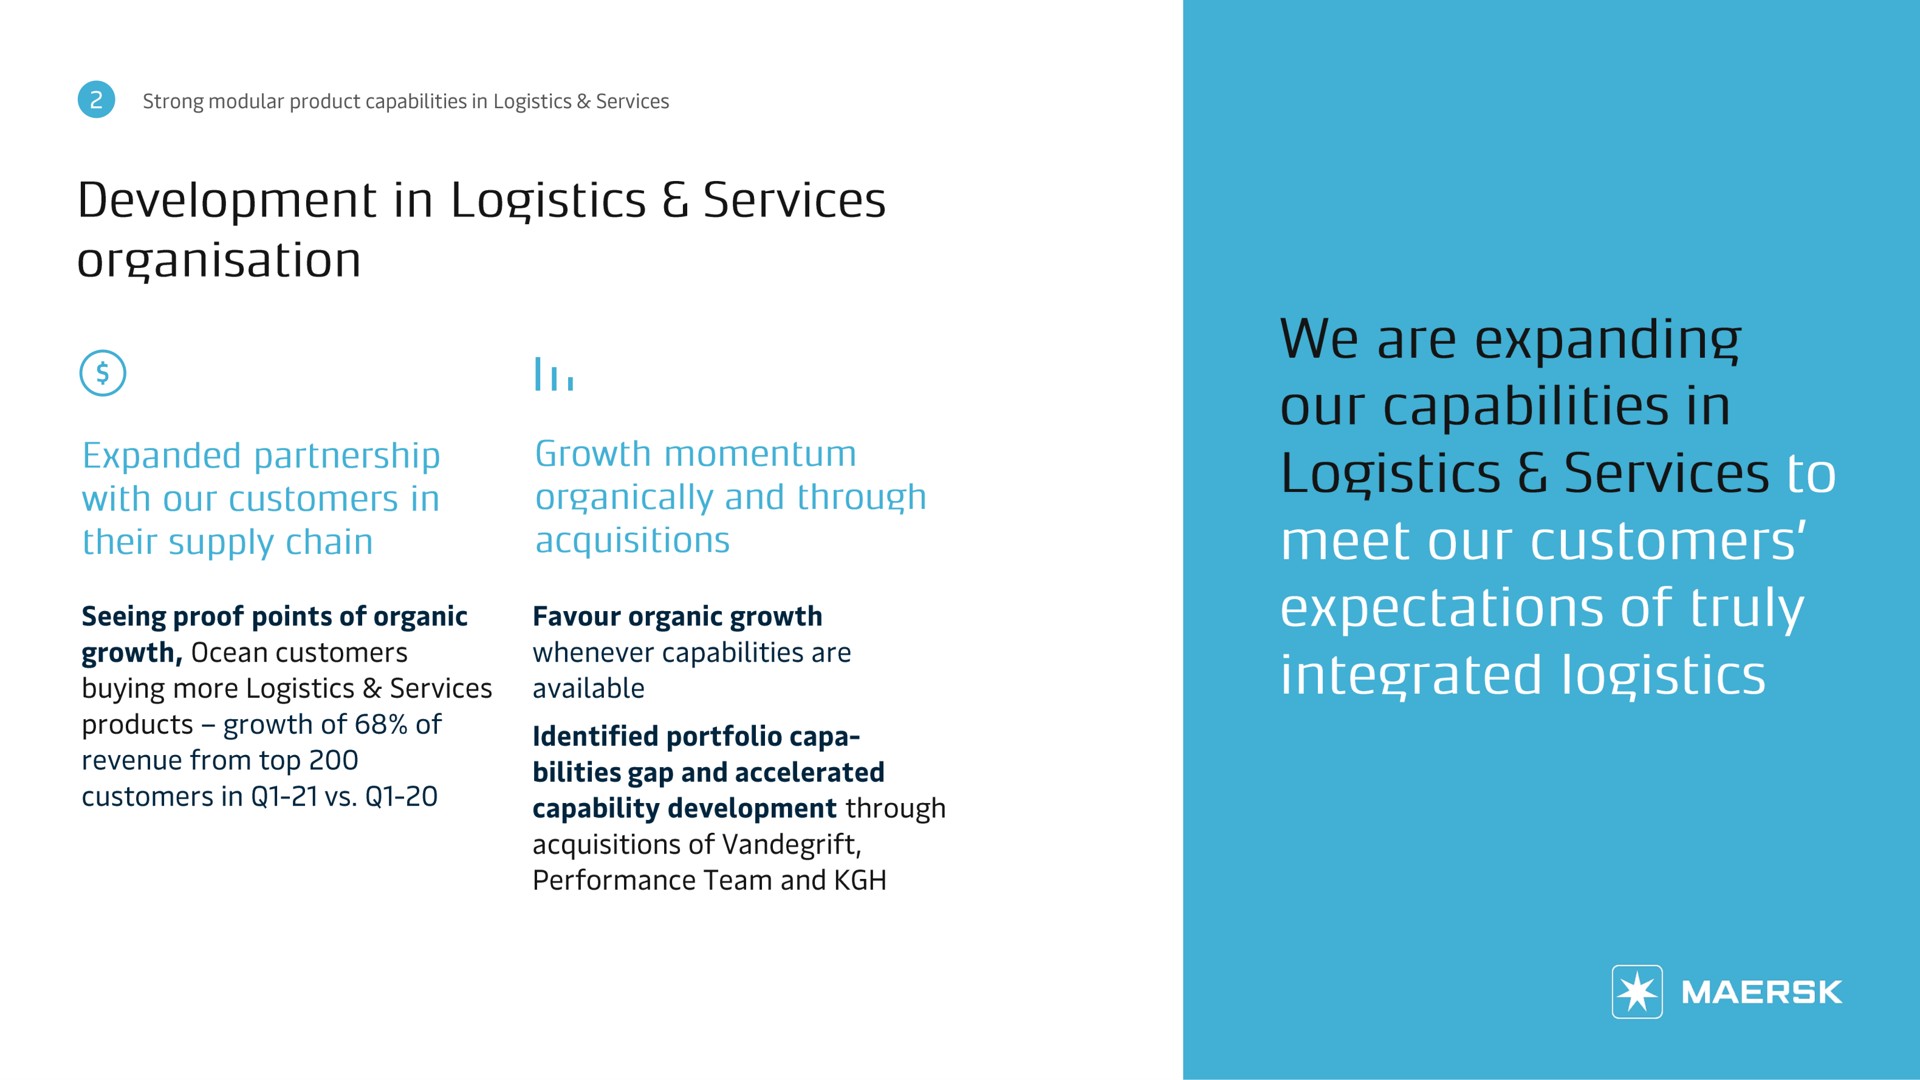 development in logistics services their supply chain we meet our customers expectations of truly integrated logistics | Maersk